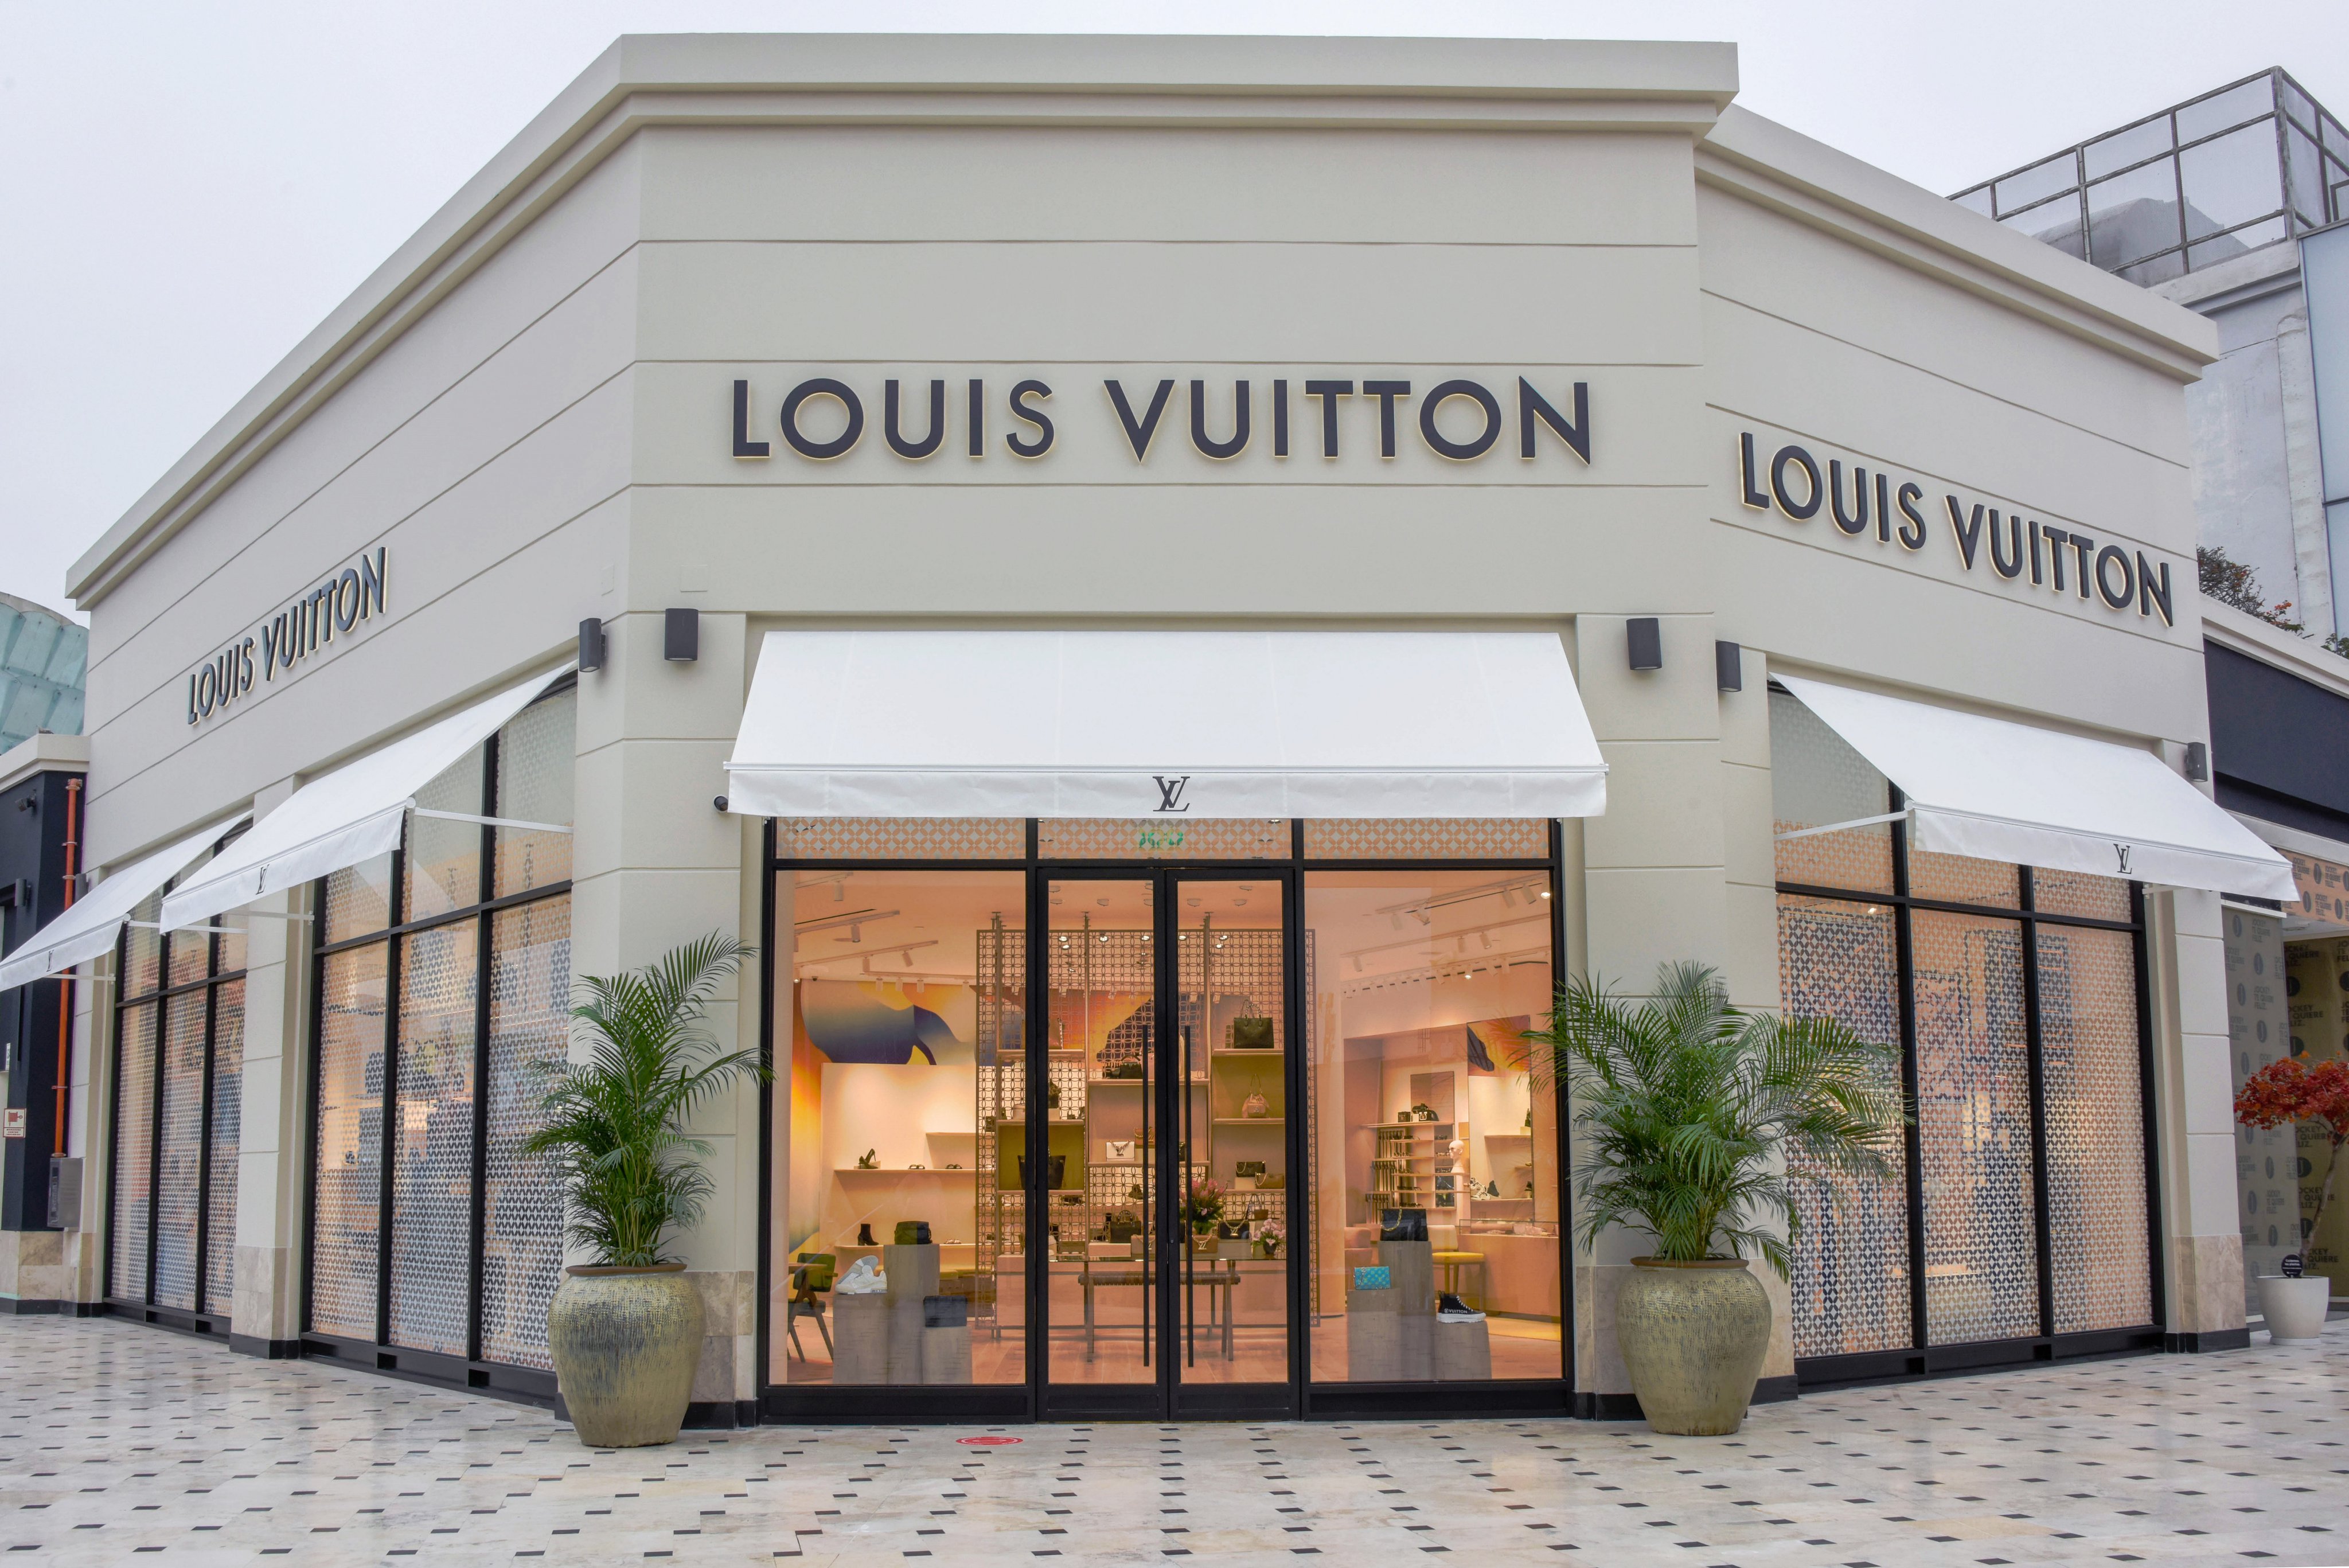 Louis Vuitton on X: #LouisVuitton comes to Lima. The Maison's first-ever  store in Peru is now open at Jockey Plaza featuring the latest collections,  including leather goods, accessories, and shoes. Find out